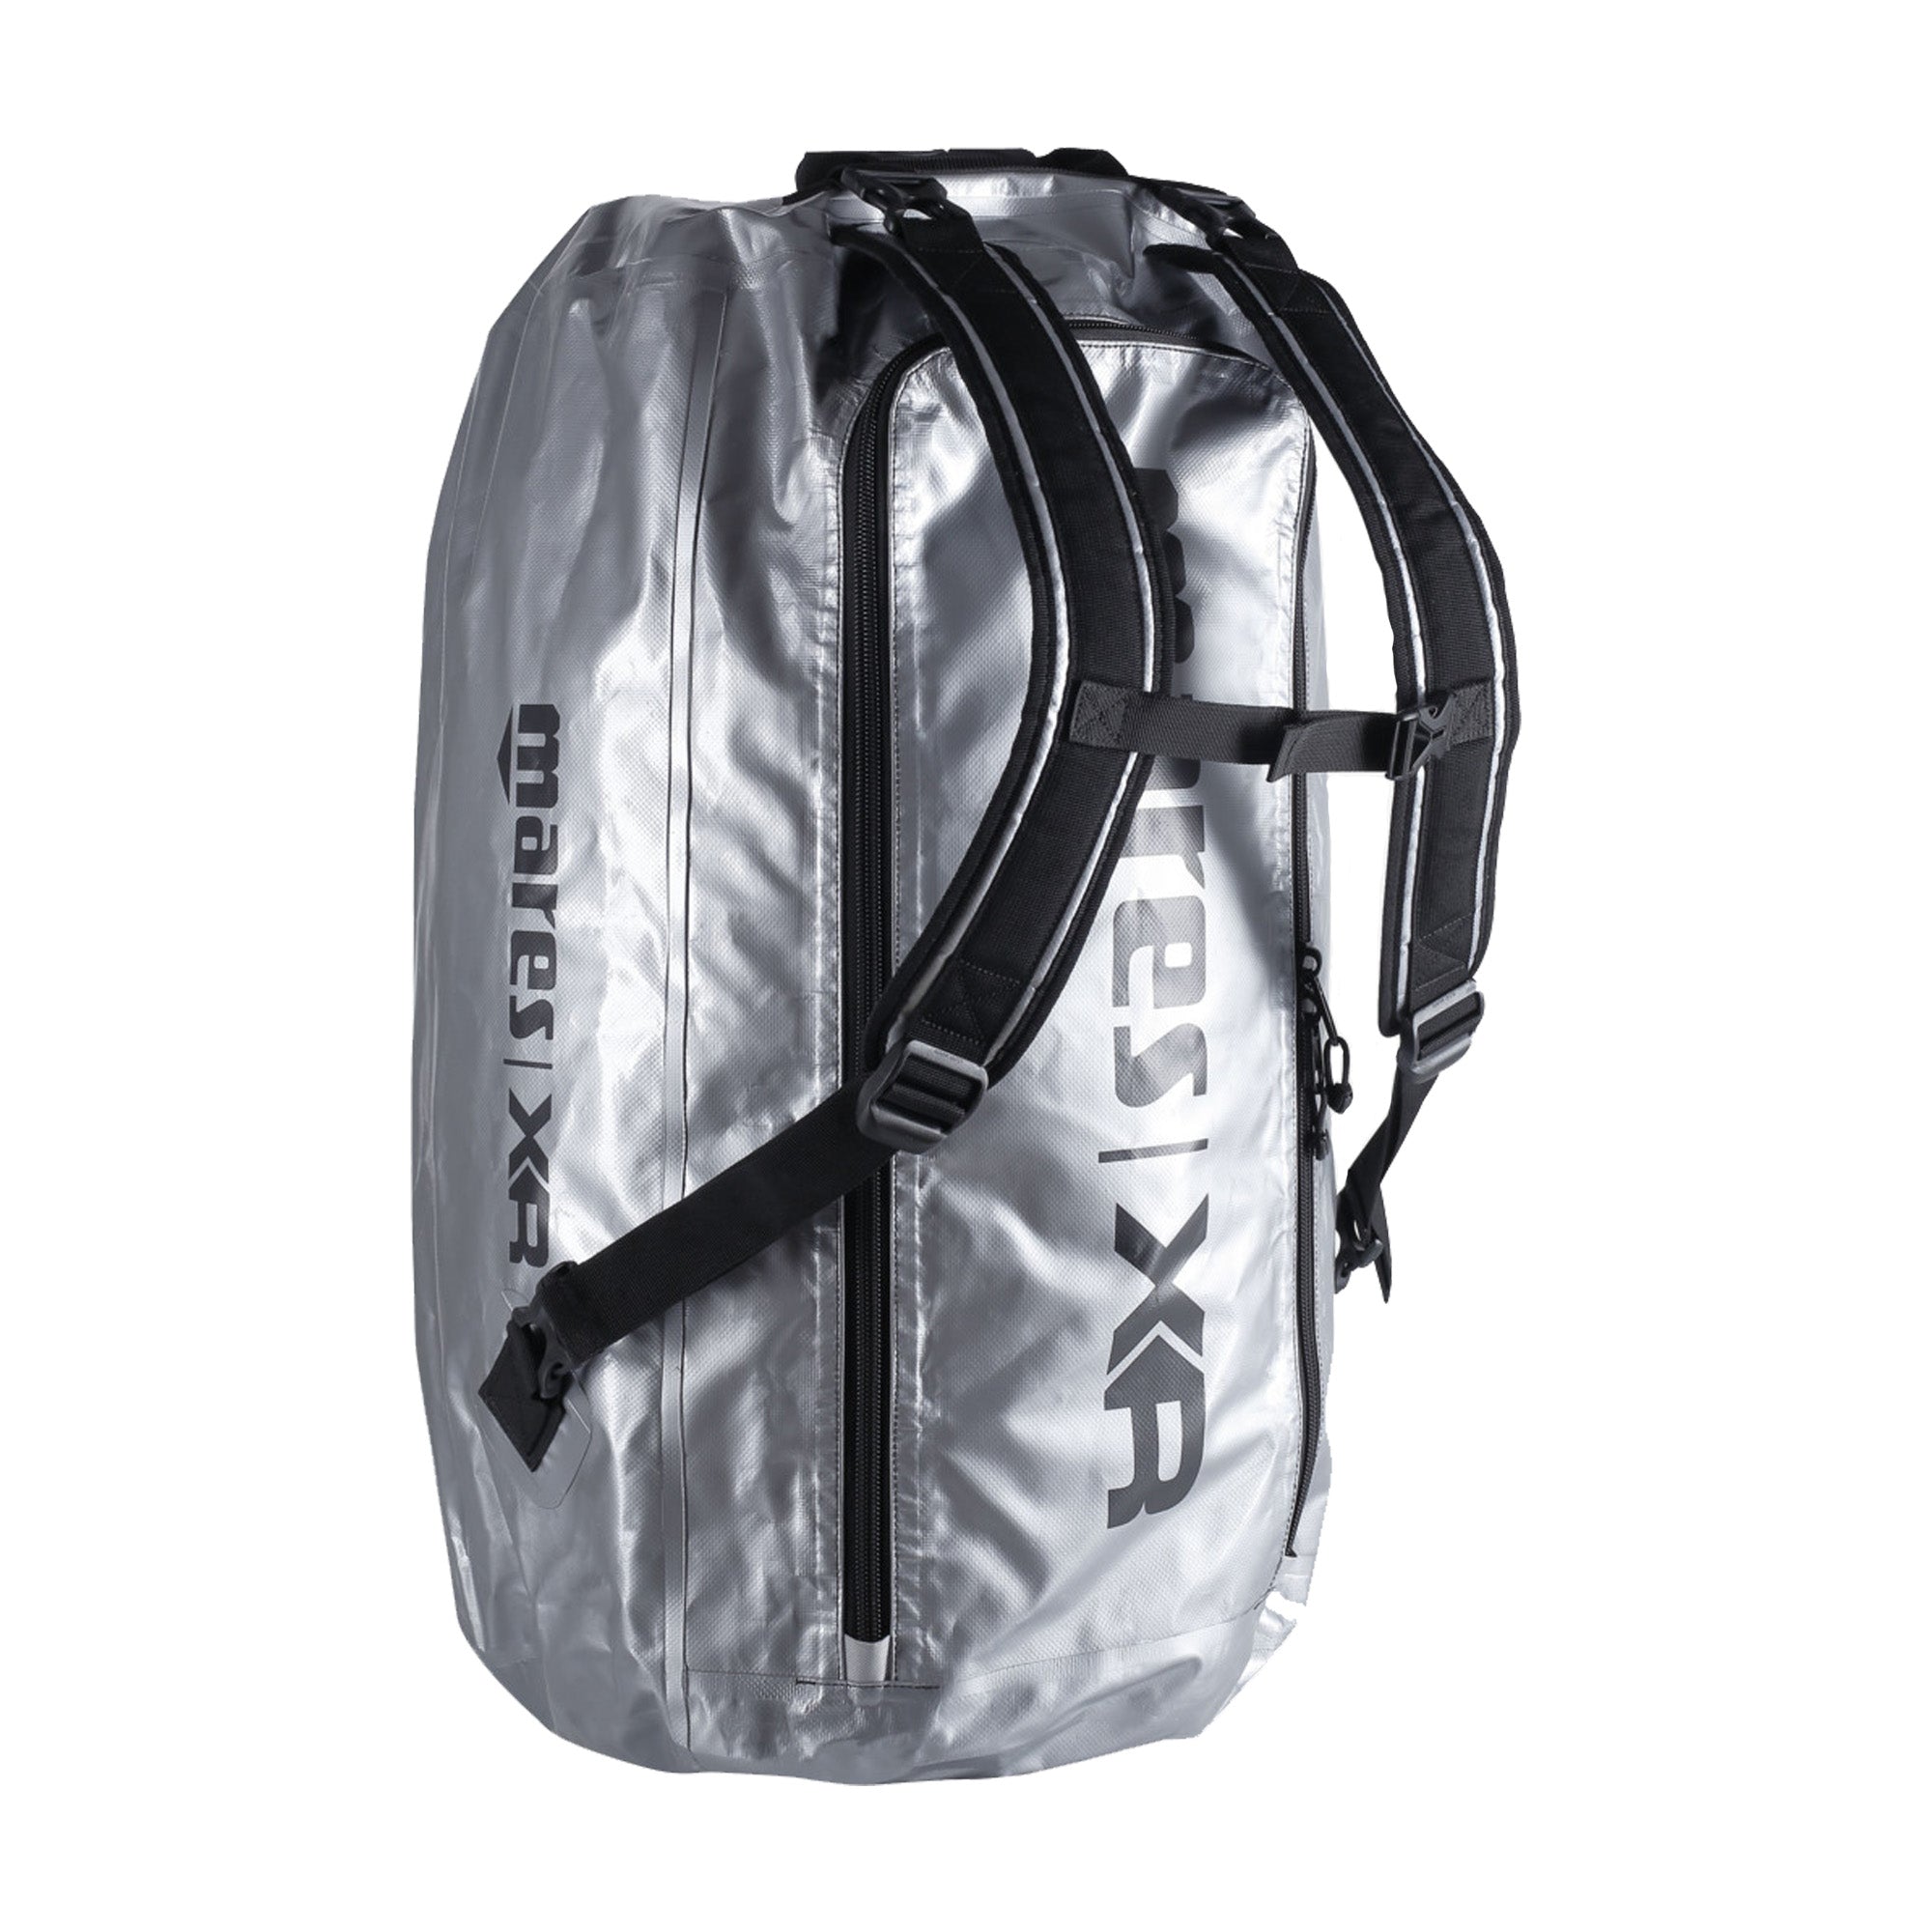 Dynafit Expedition 30 Touring Pack – Cripple Creek Backcountry